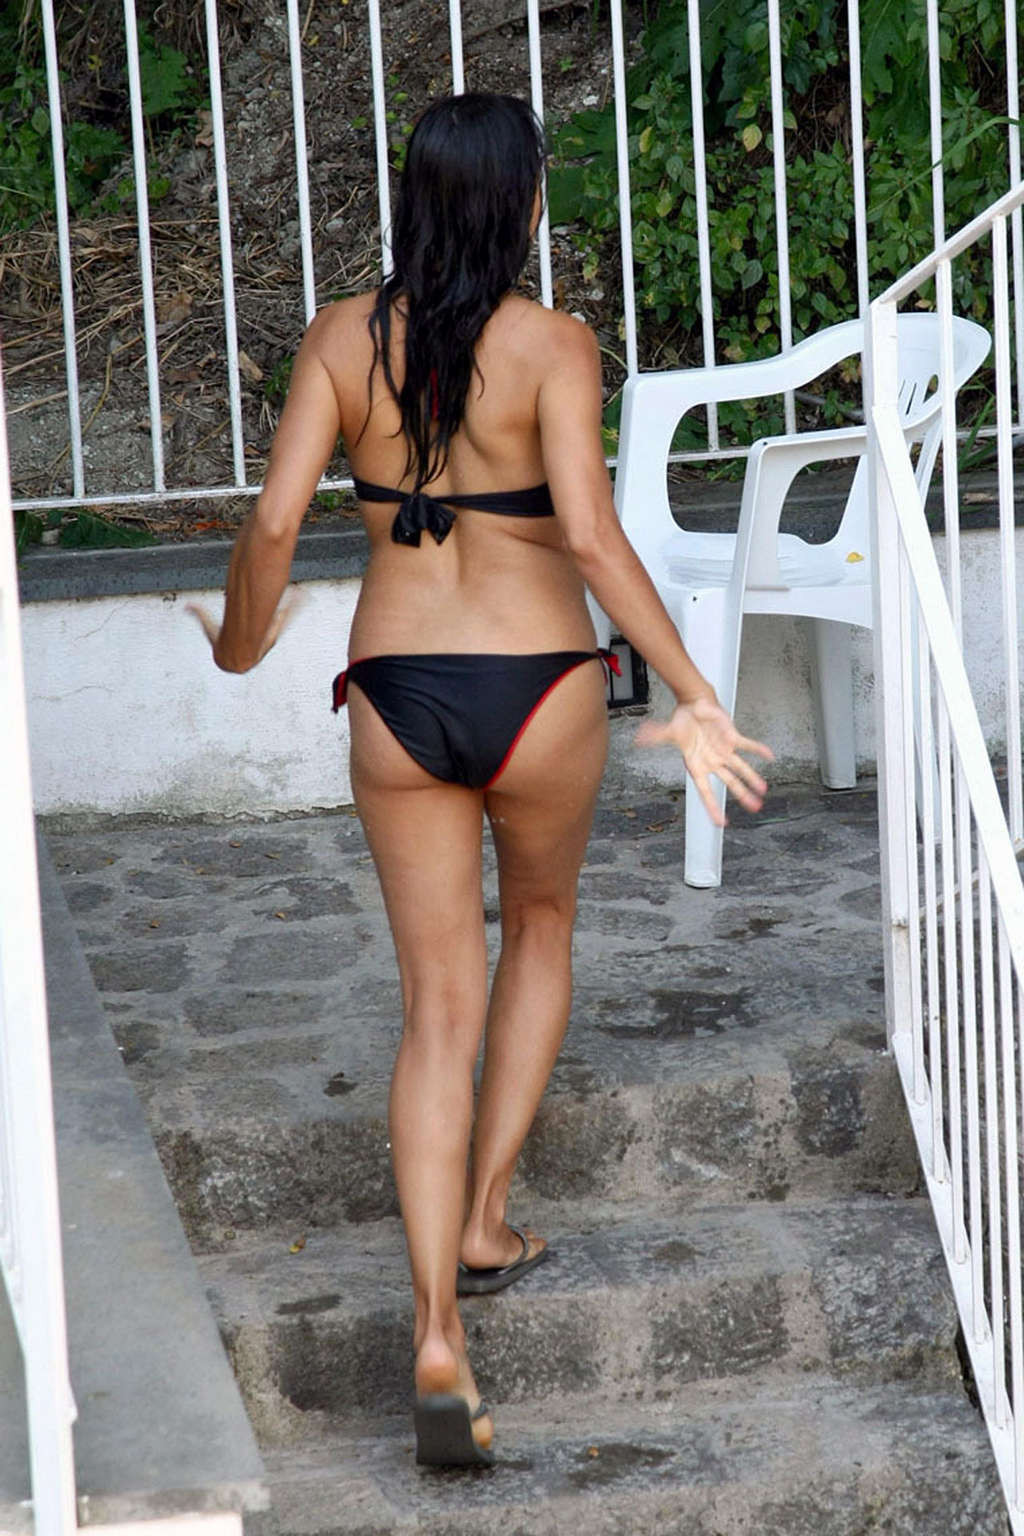 Rosario Dawson enjoying at the pool and showing her huge tits very sexy photos #75375858